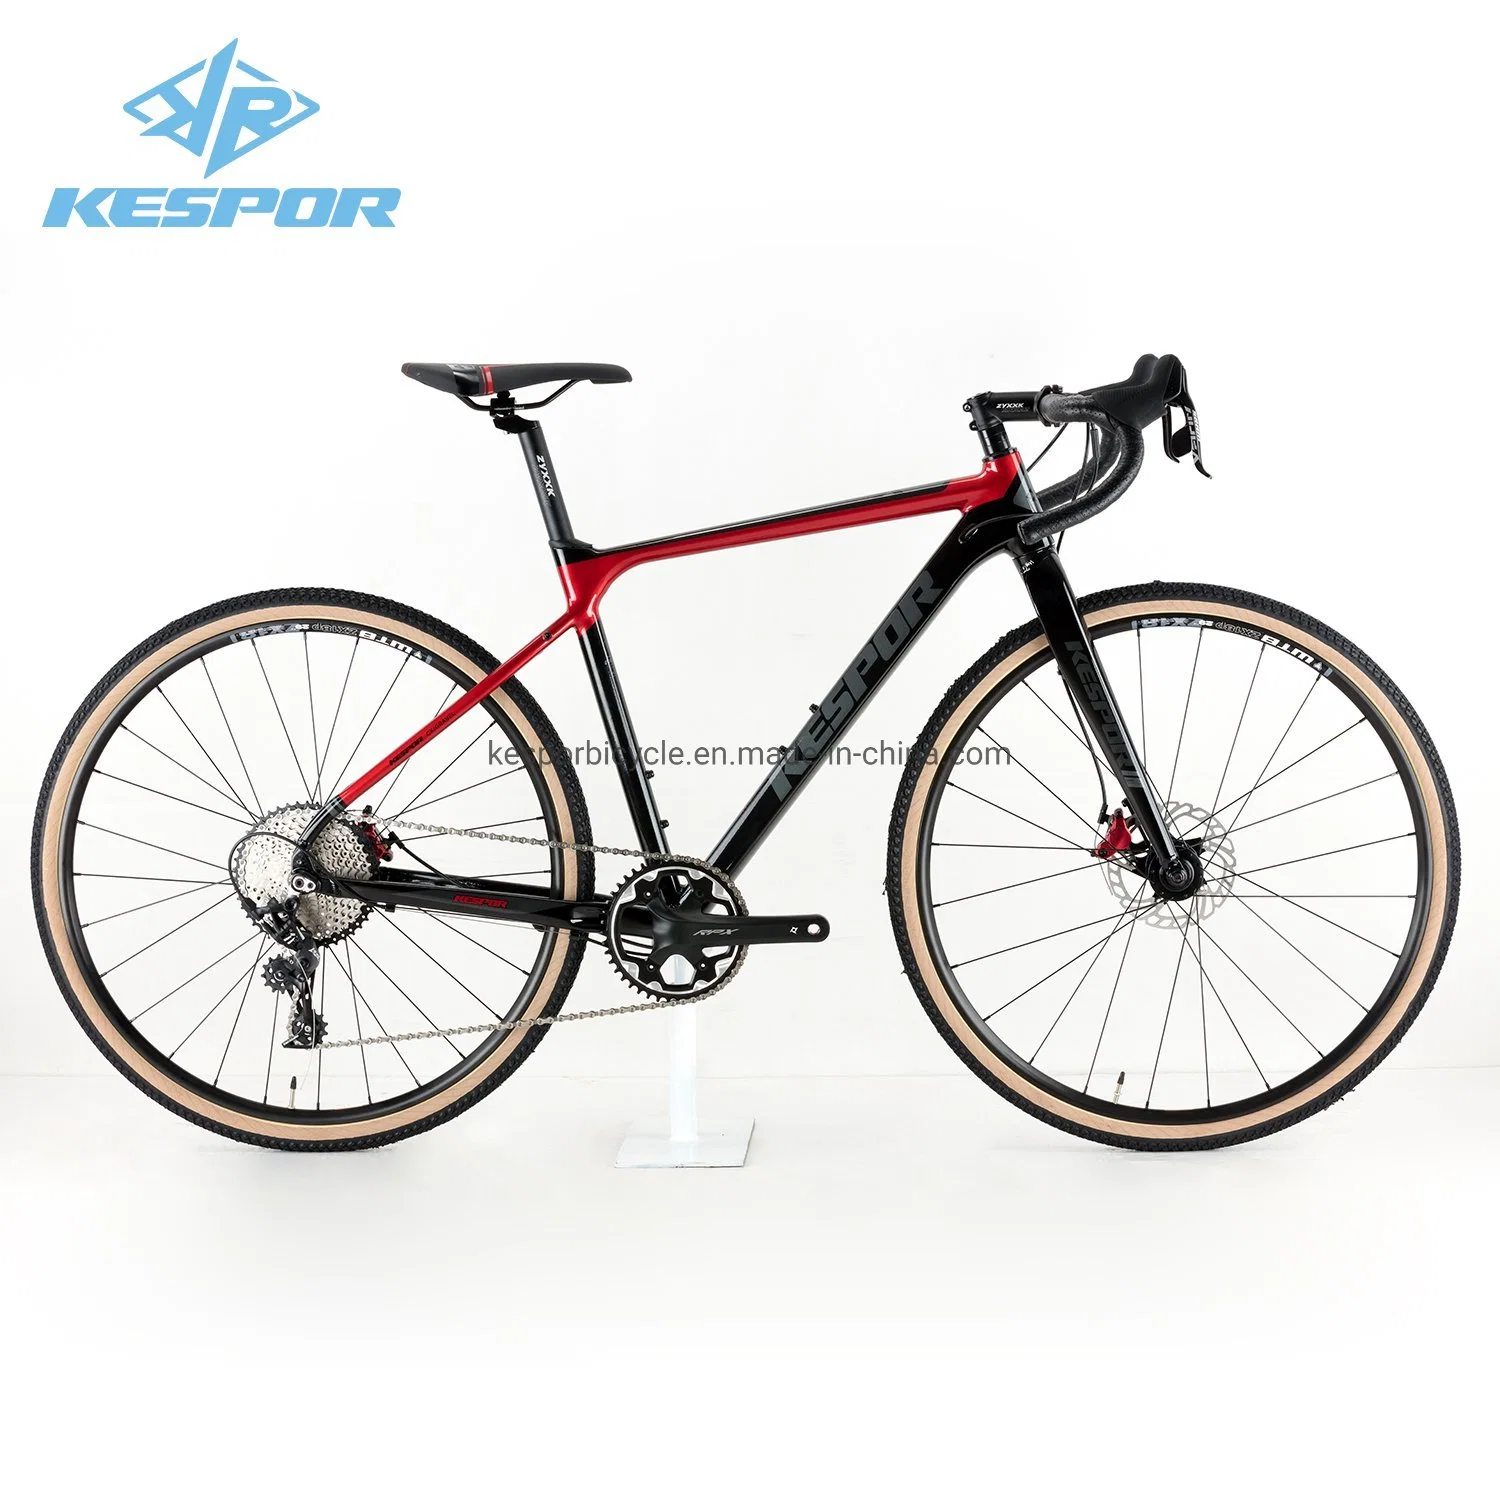 High Quality Two Colors X-Challenge 700c 11 Speed Road Bike Bicycle with Alloy Frame for Wholesale